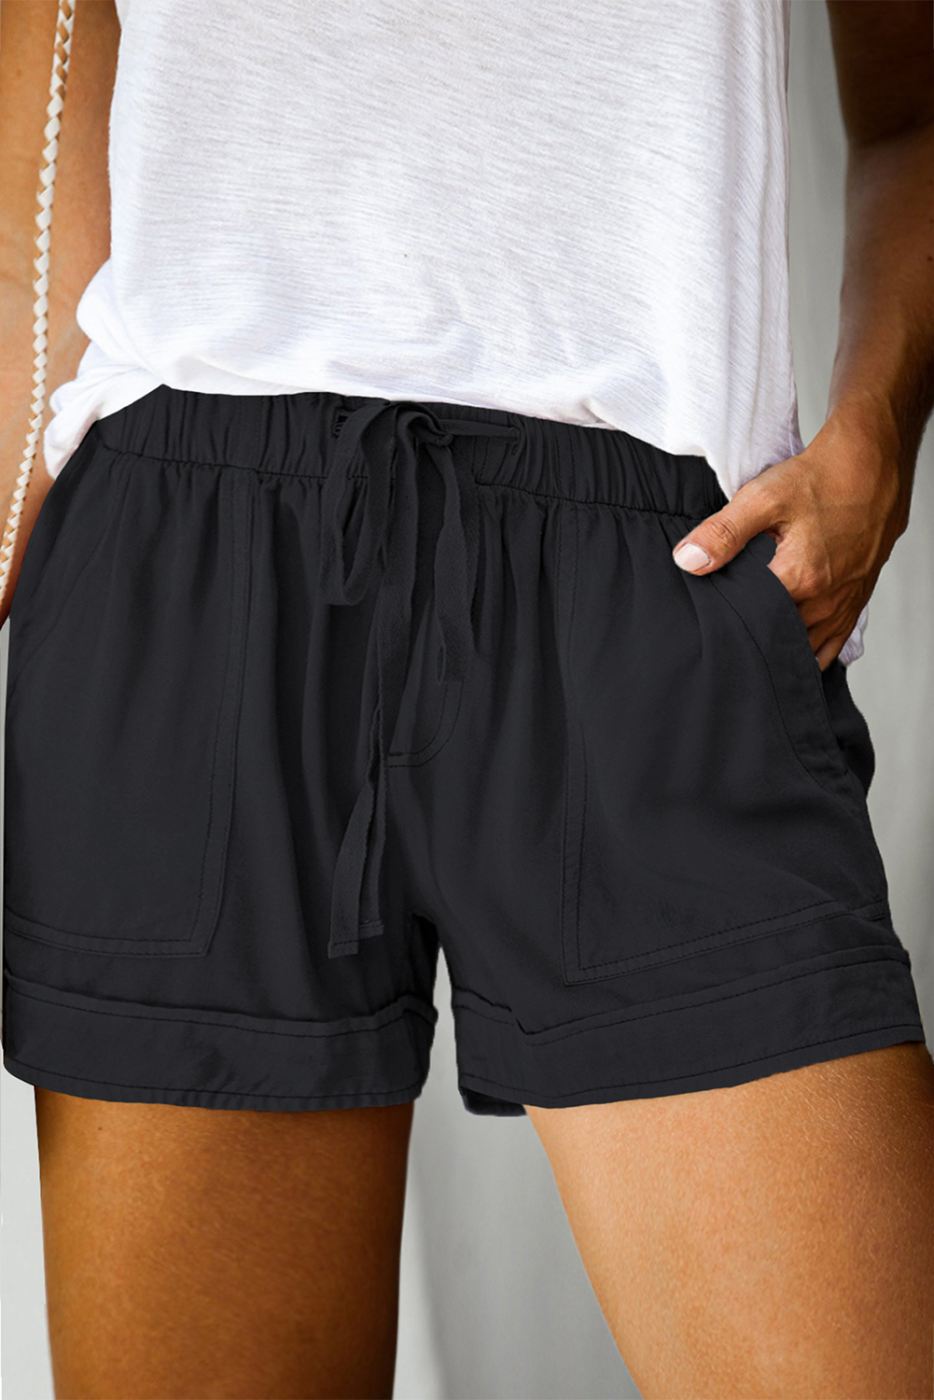 Tie Me Over Shorts- Black: FINAL CLEARANCE